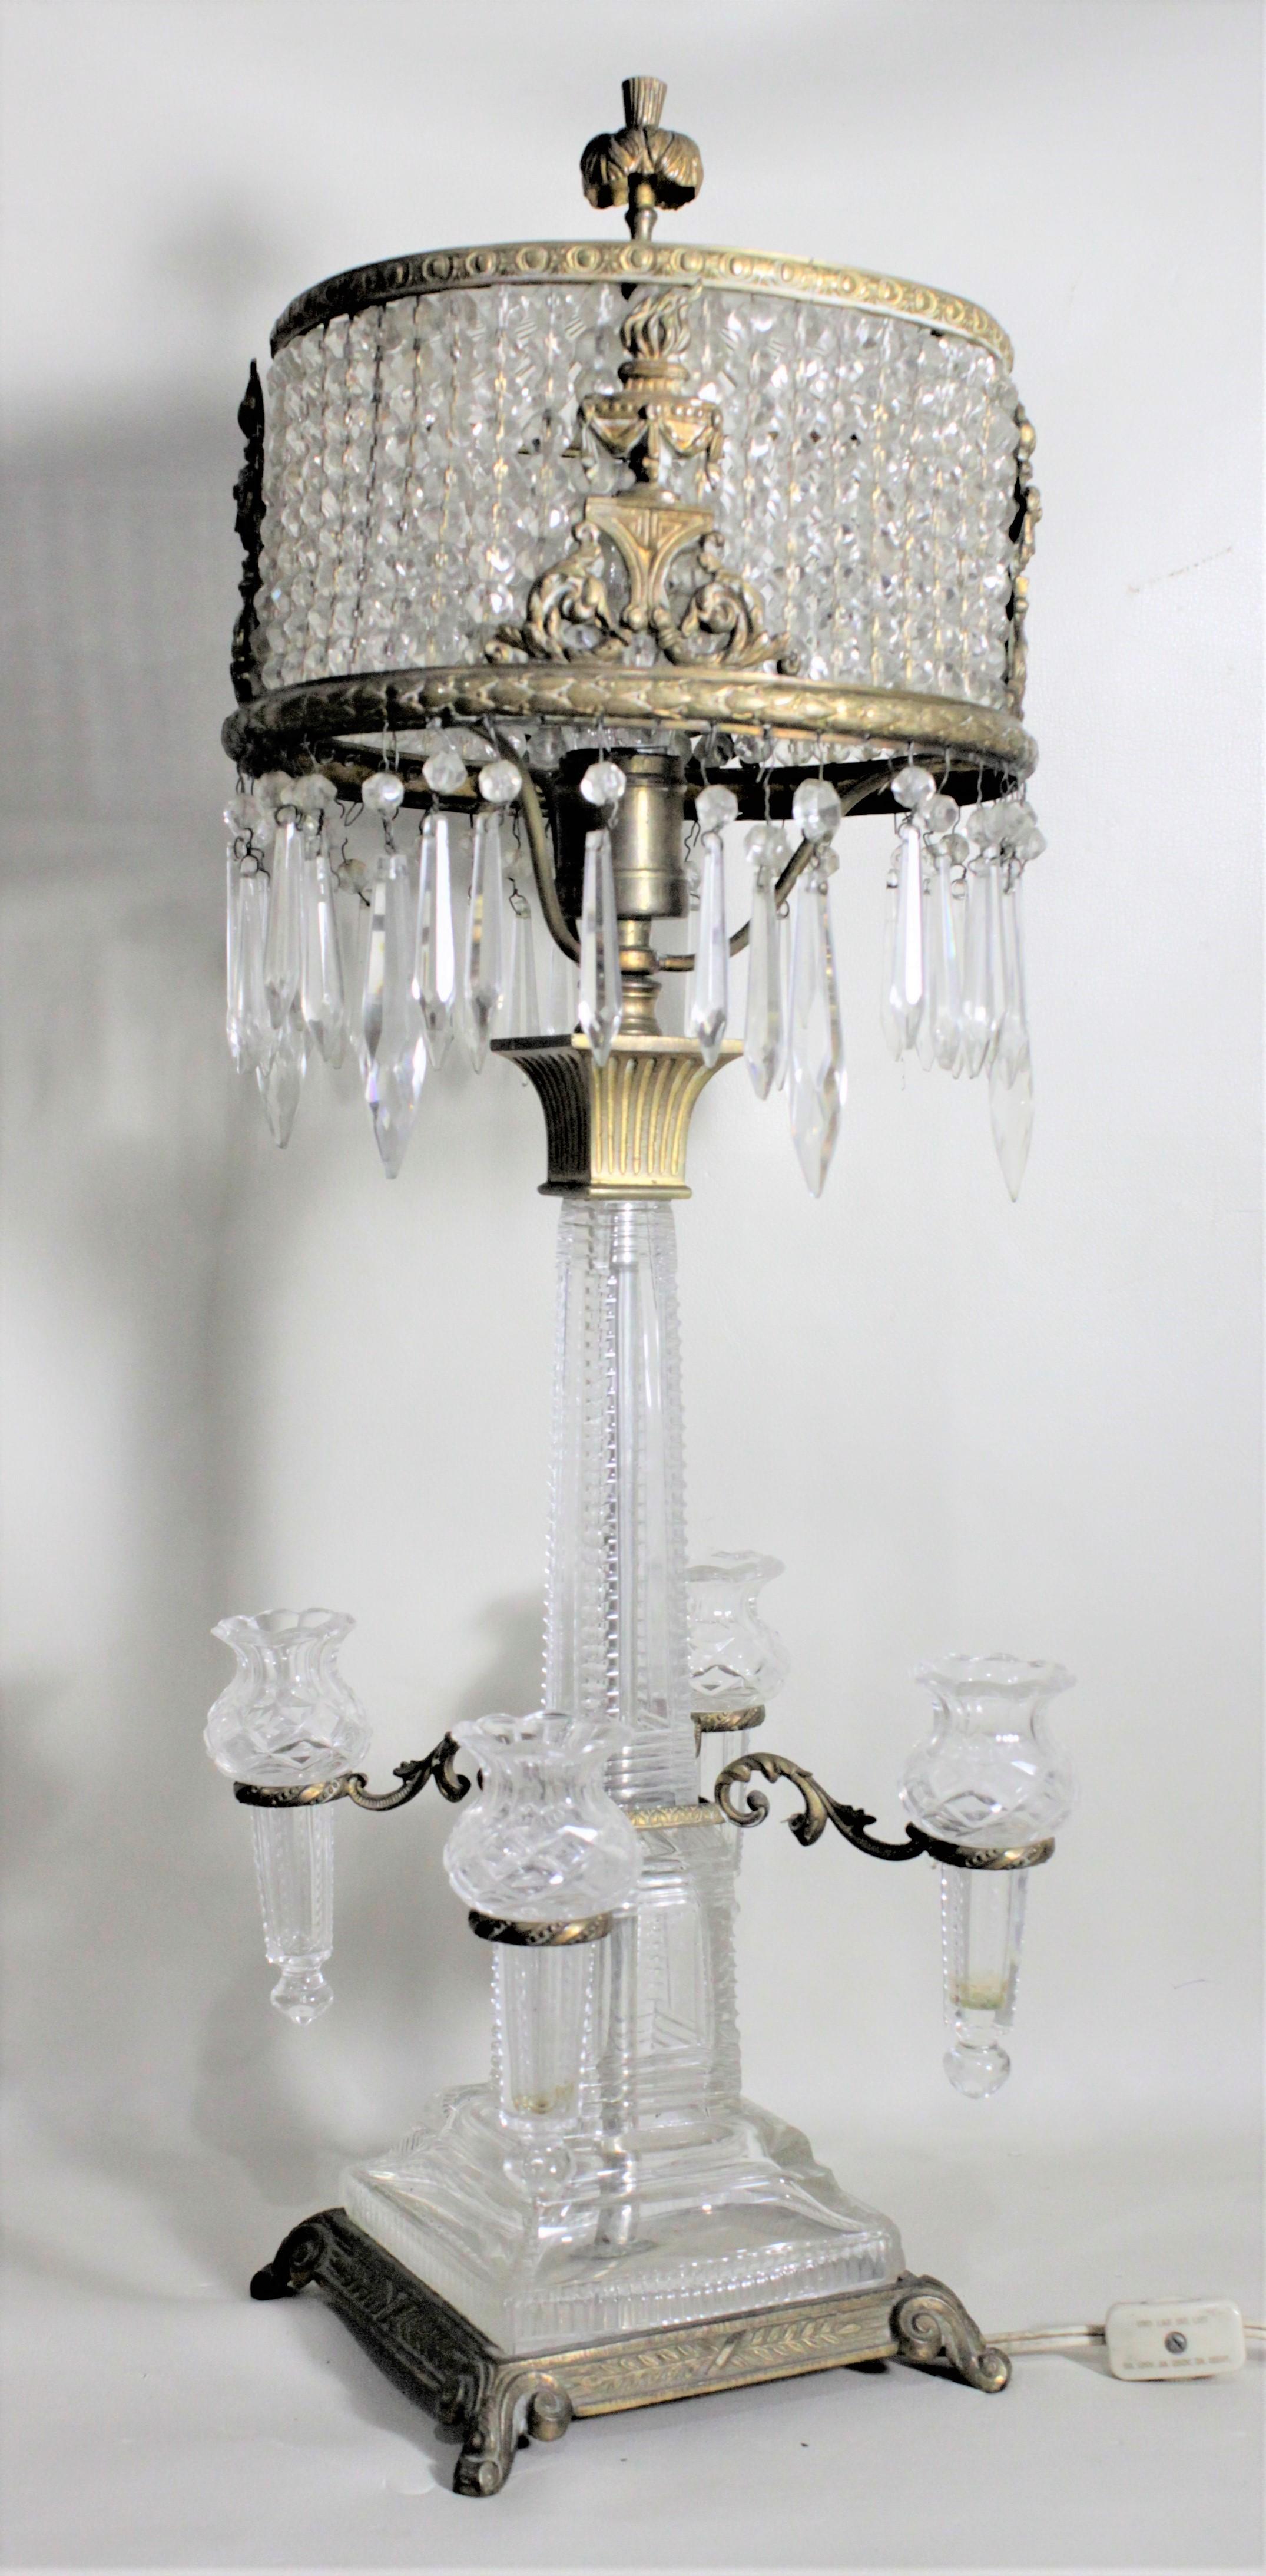 This very unique antique crystal lamp is unsigned, but presumed to have been made in Continental Europe, most likely Austria, in circa 1900 in the period Edwardian style. This lamp is composed of cut glass and crystal with gilt finished cast metal